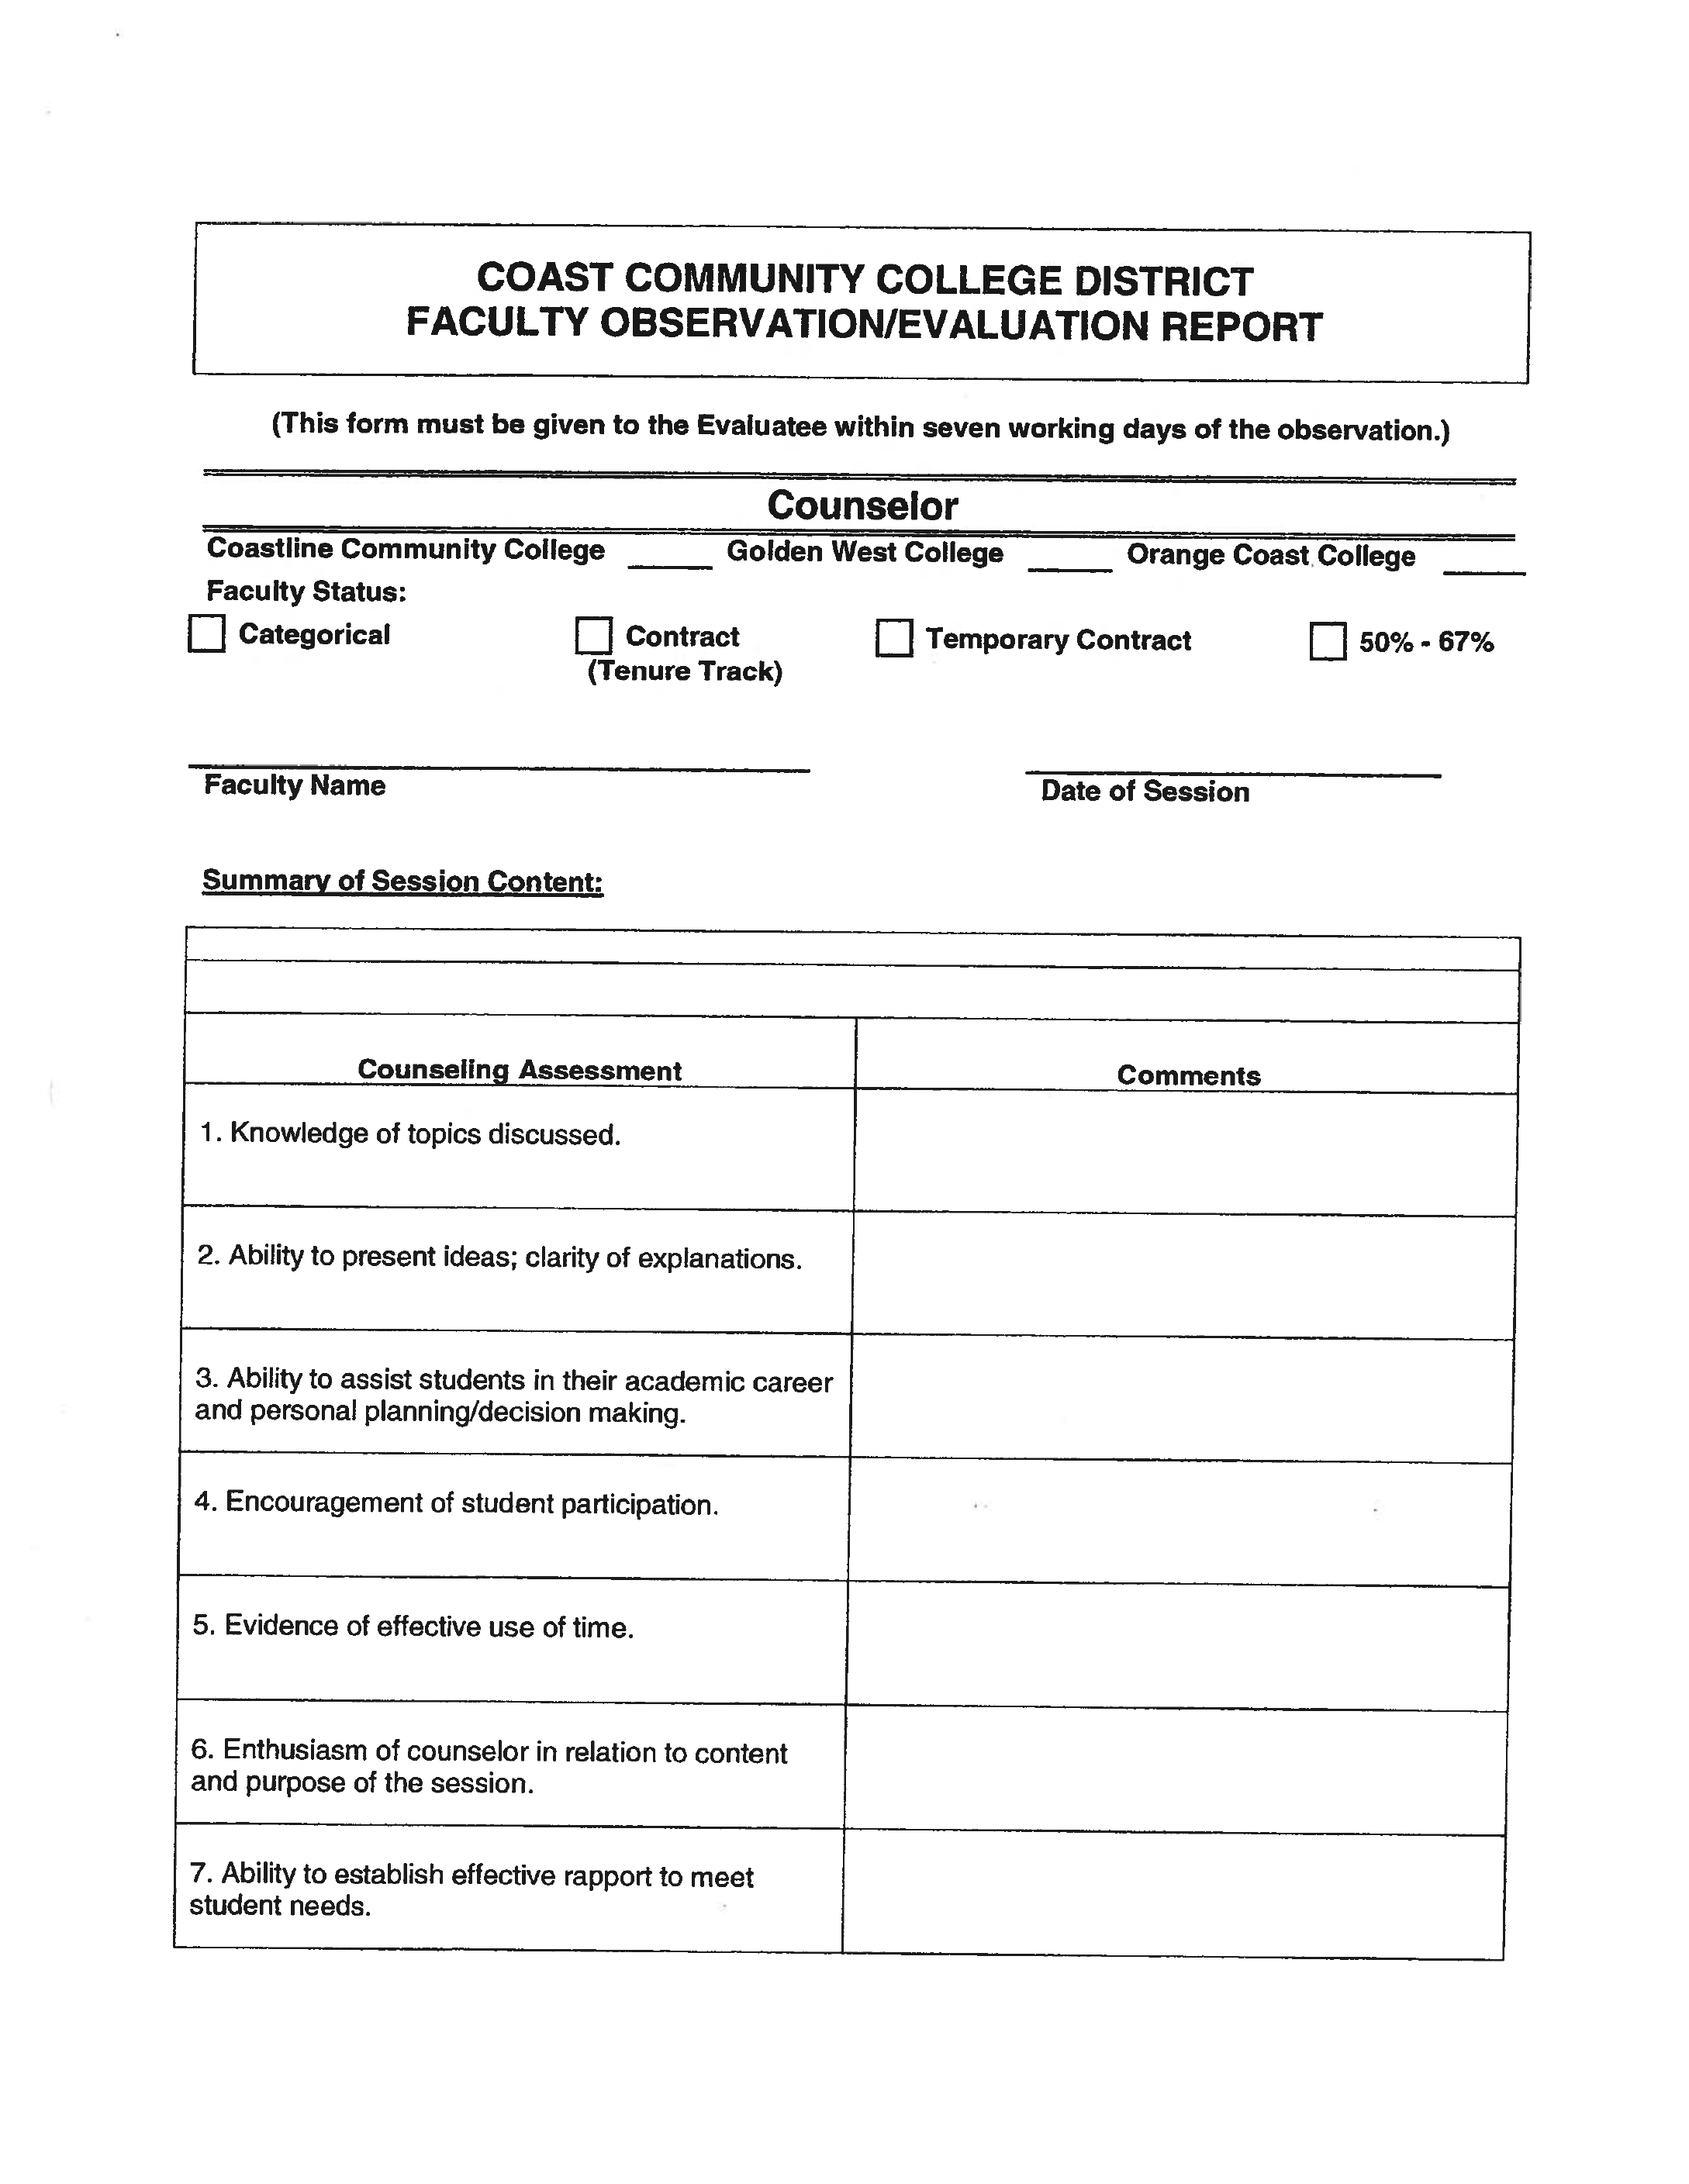 how to fill self performance appraisal form sample